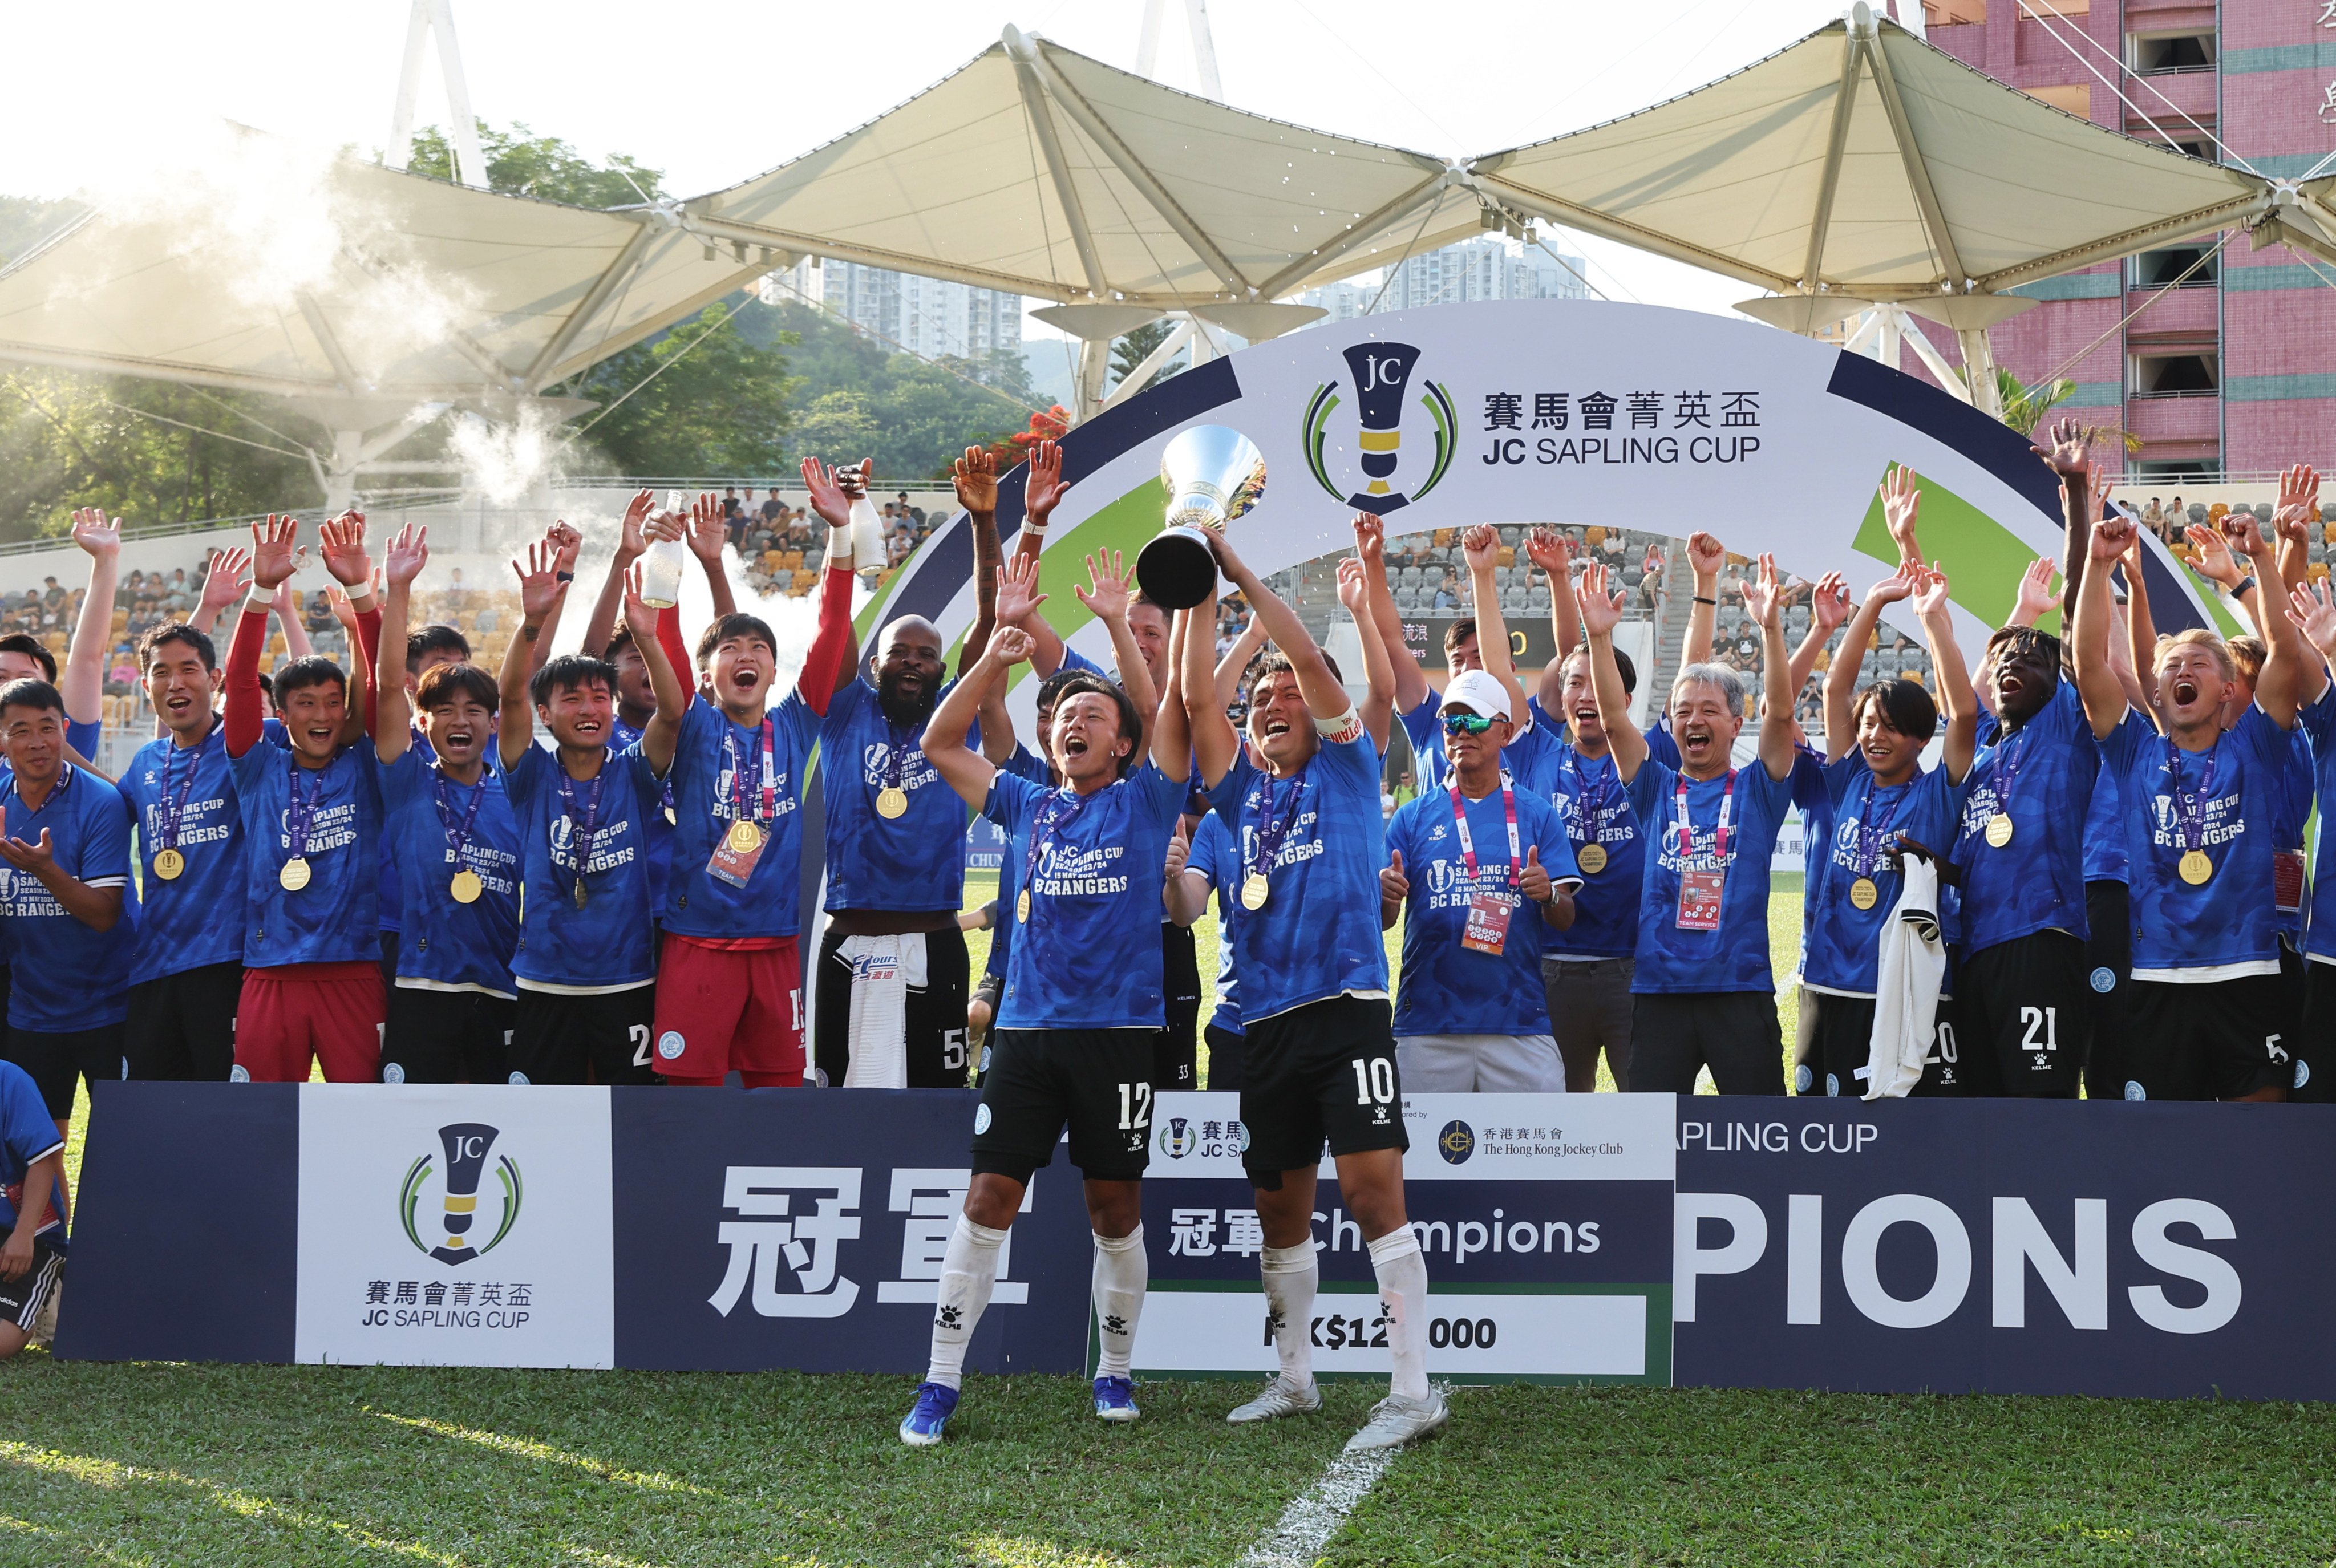 BC Rangers celebrate after beating Kitchee to win the JC Sapling Cup in Mong Kok Stadium. It was their first trophy since 1995. Photo: SCMP/Edmond So